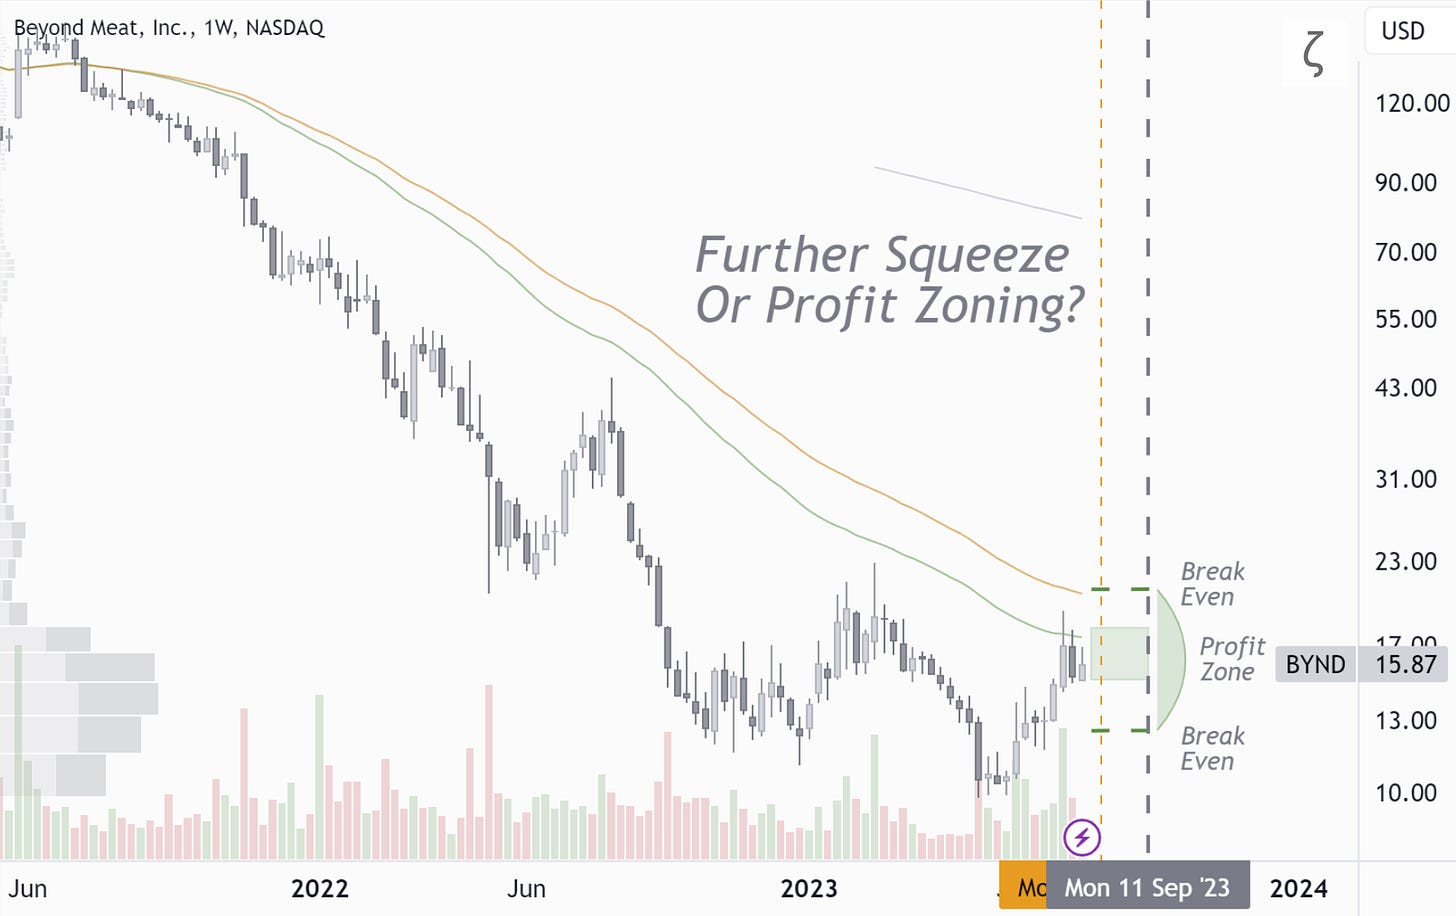 BYND: Further Squeeze Or Profit Zoning?